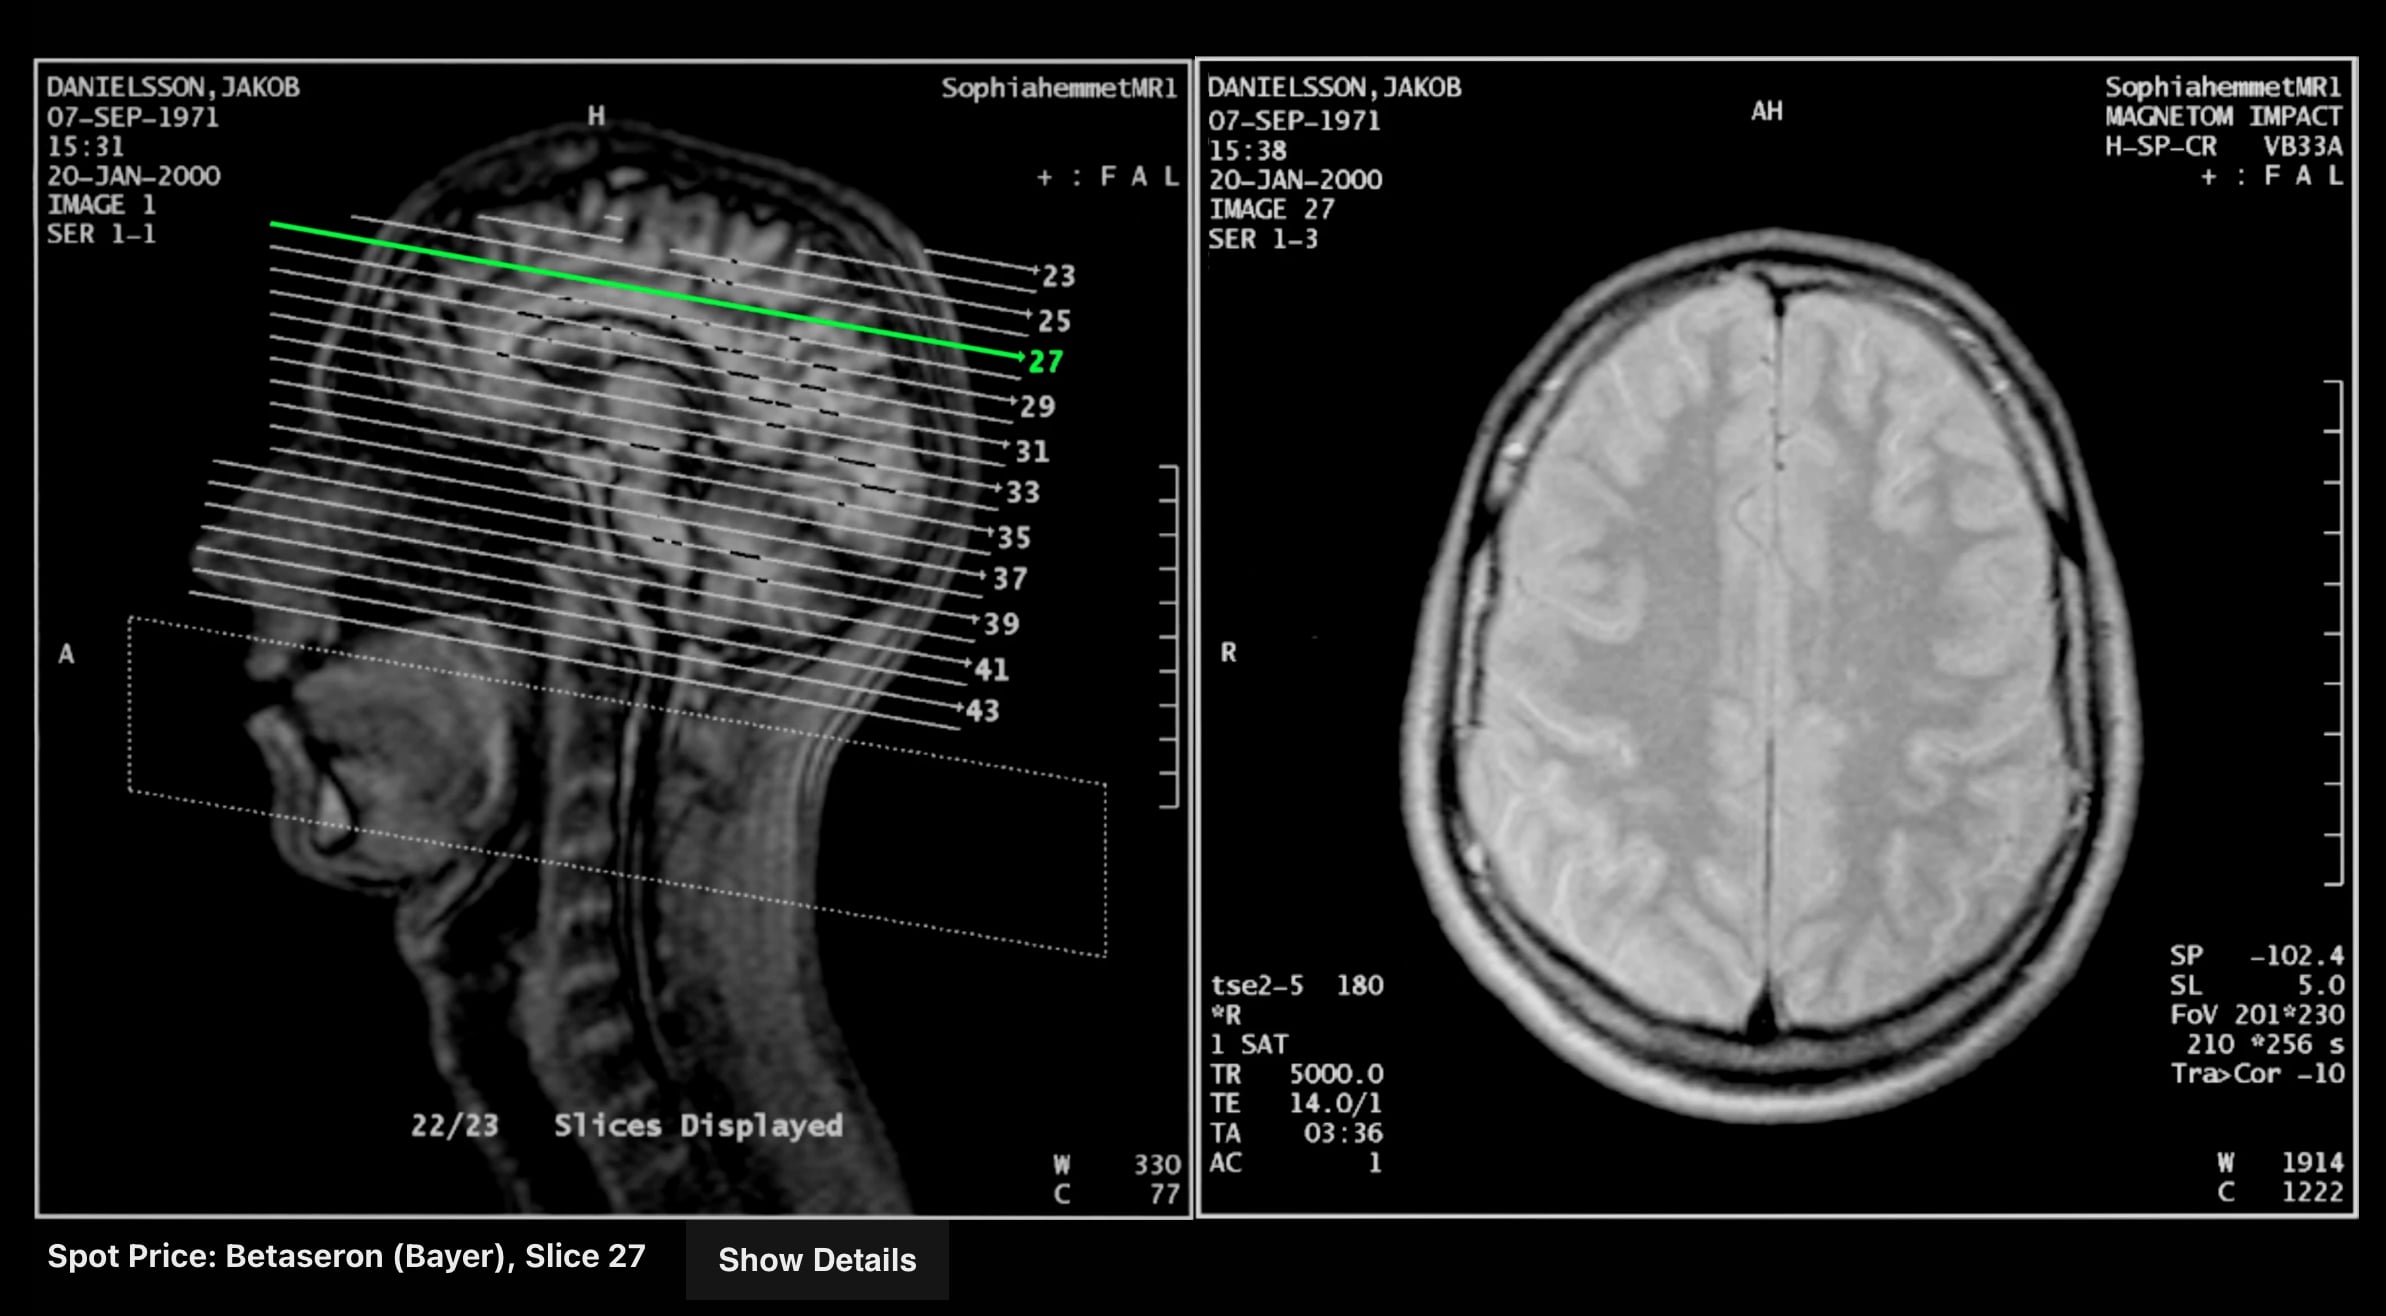 A digital image showing two views on an MRI brain scan